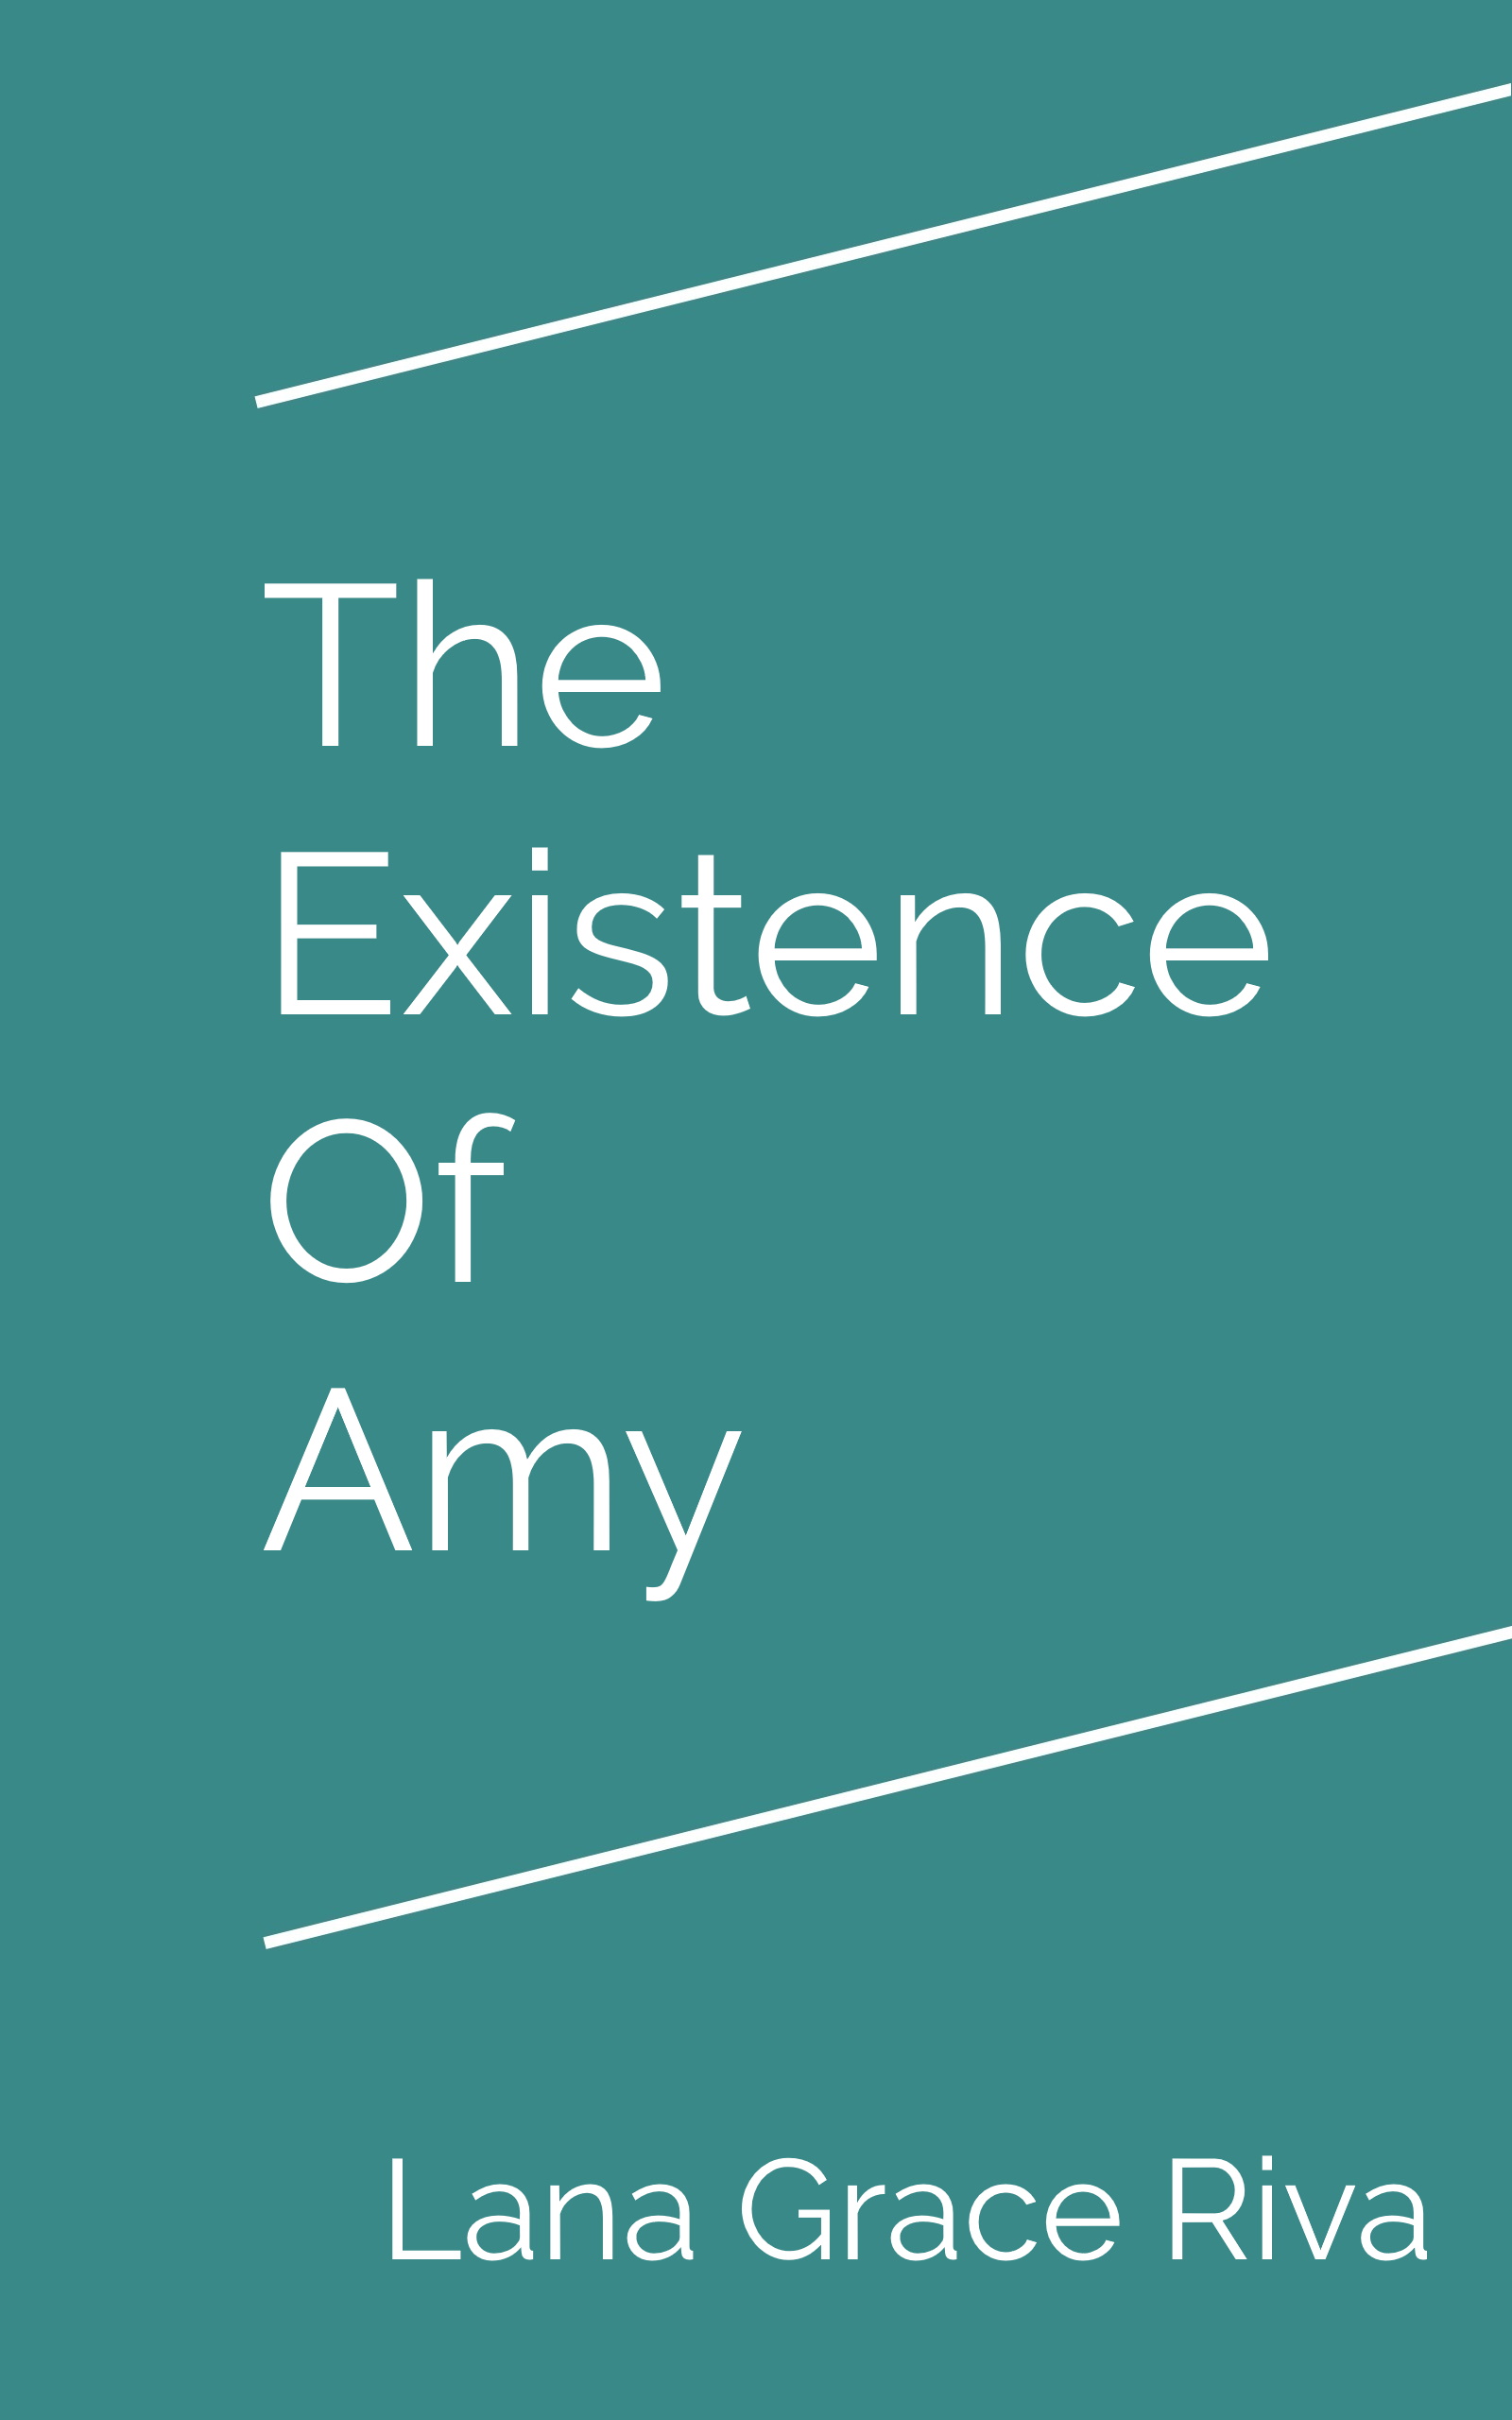 FREE: The Existence Of Amy by Lana Grace Riva